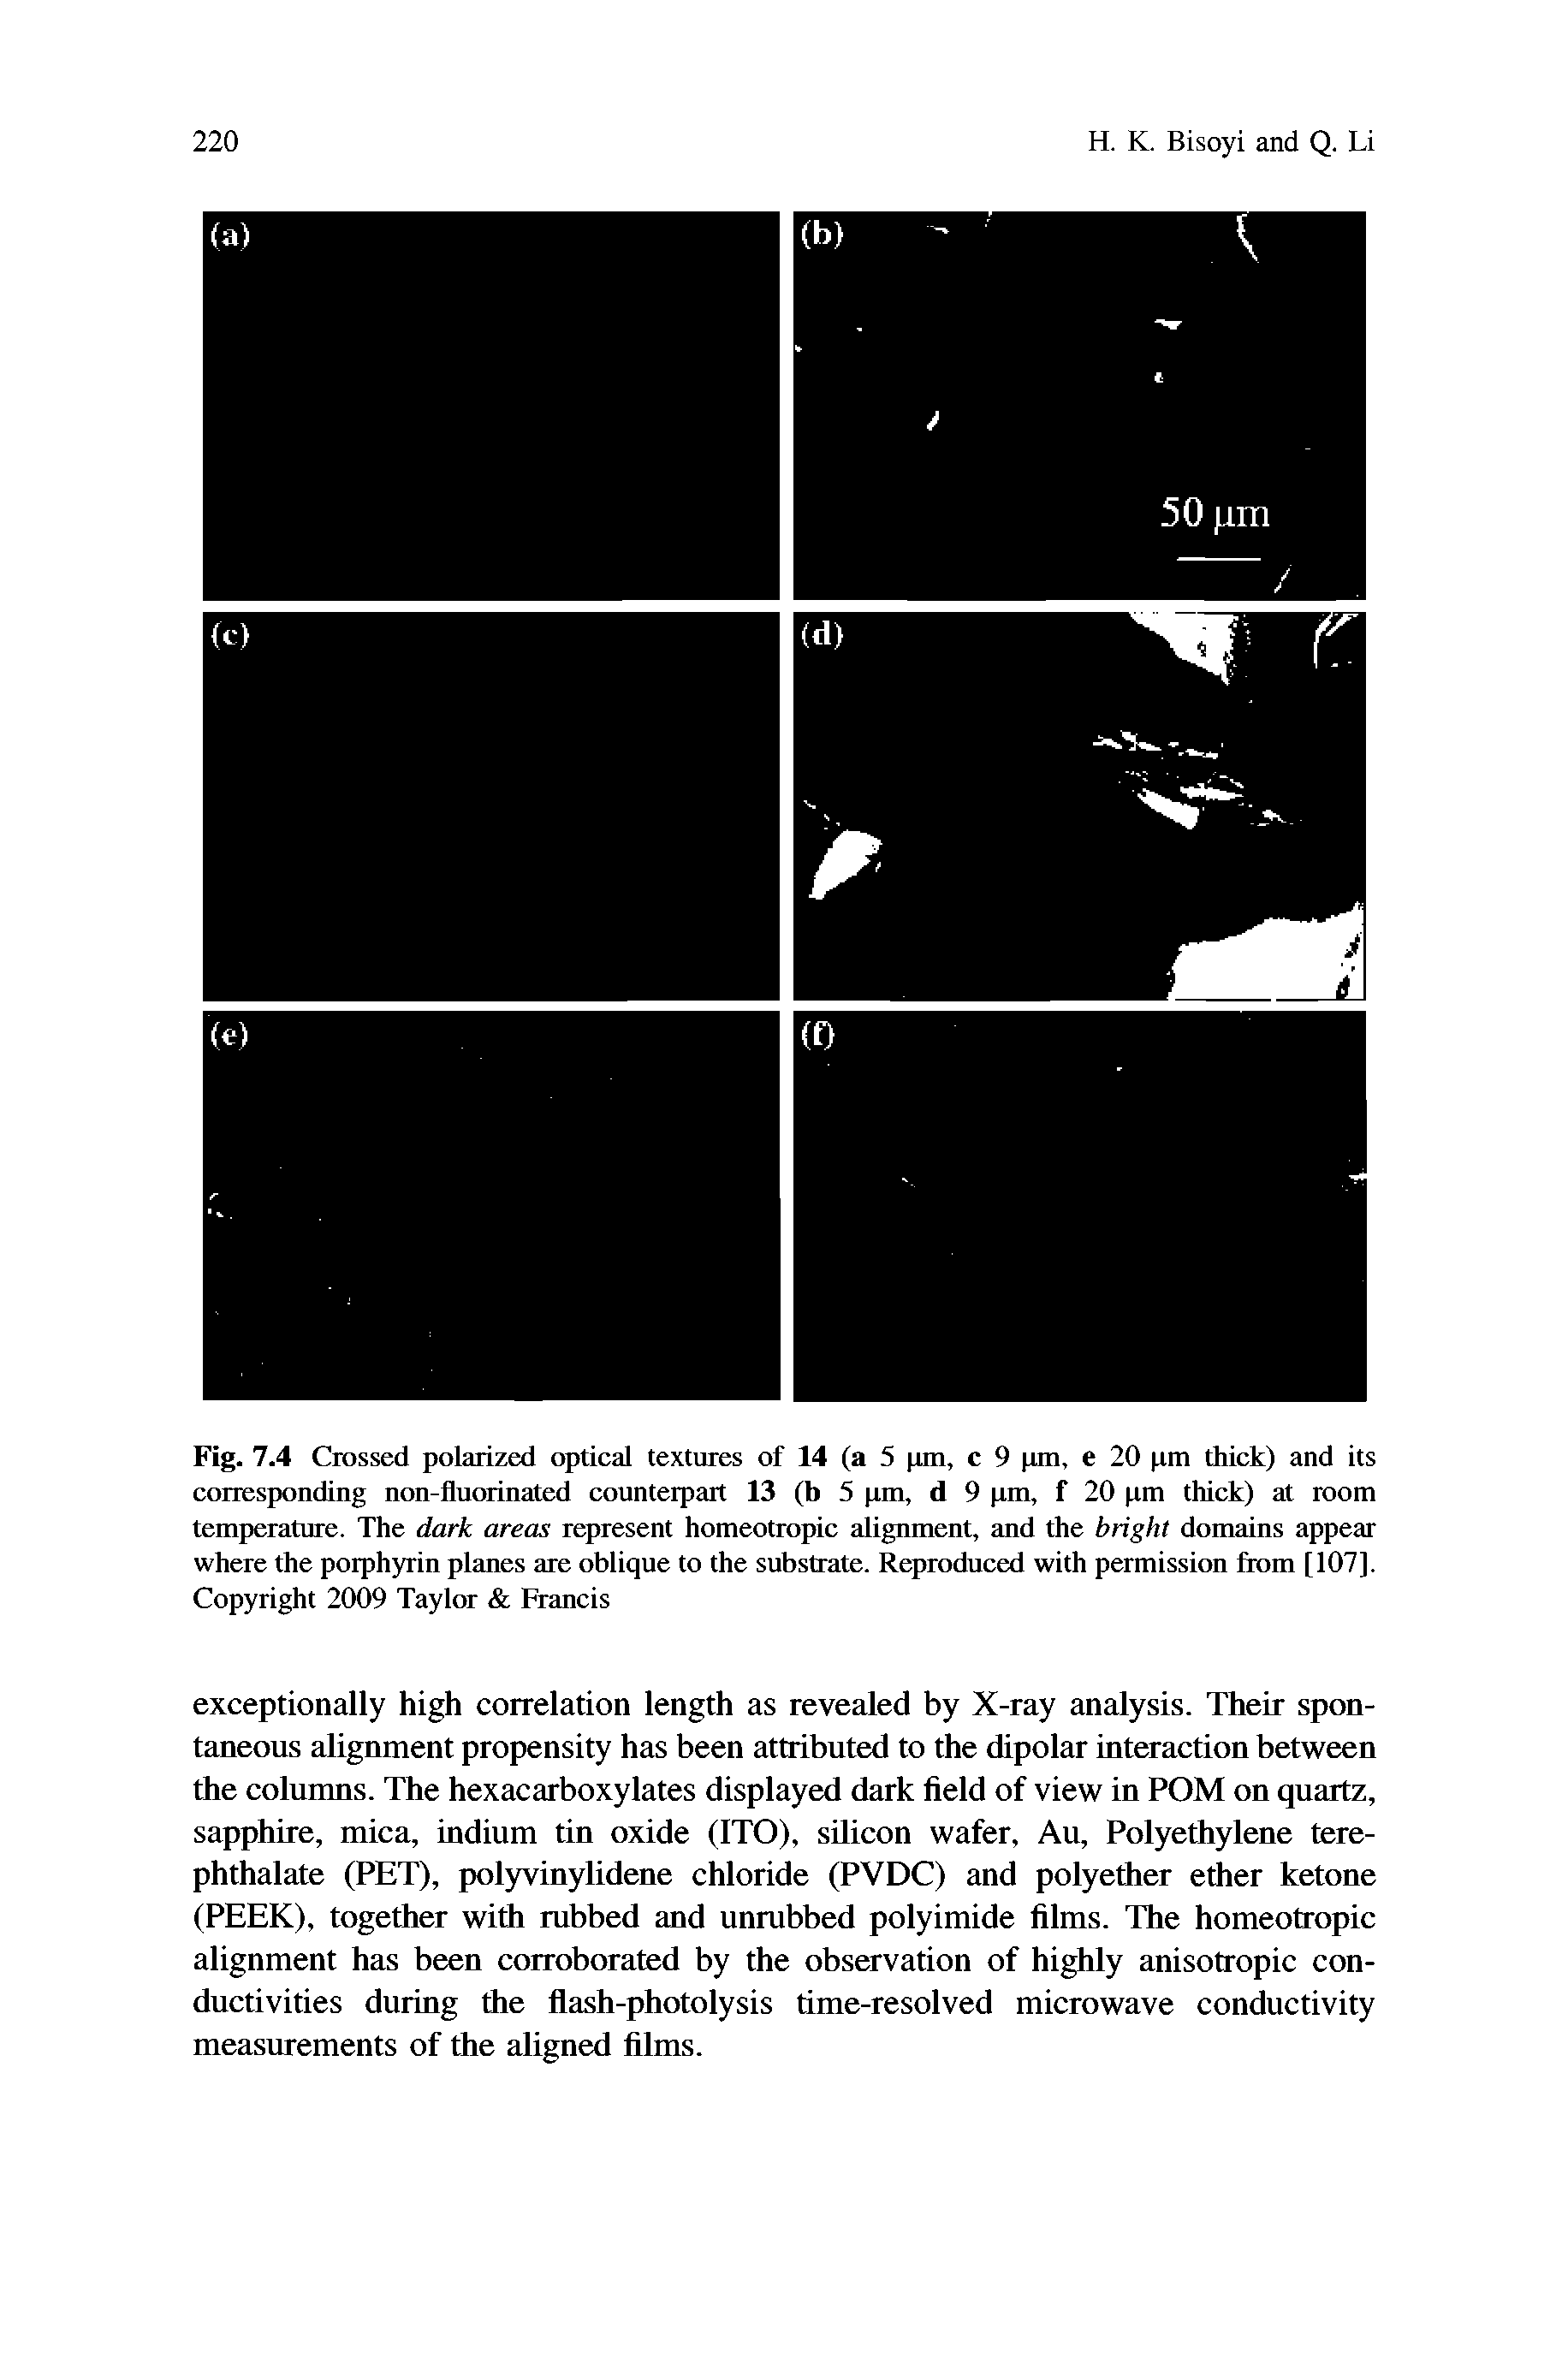 Fig. 7.4 Crossed polarized optical textures of 14 (a 5 pm, c 9 pm, e 20 pm thick) and its corresponding non-fluorinated counterpart 13 (b 5 pm, d 9 pm, f 20 pm thick) at room temperature. The dark areas represent homeotropic alignment, and the bright domains appear where the porphyrin planes are oblique to the substrate. Reproduced with permission from [107]. Copyright 2009 Taylm- Francis...